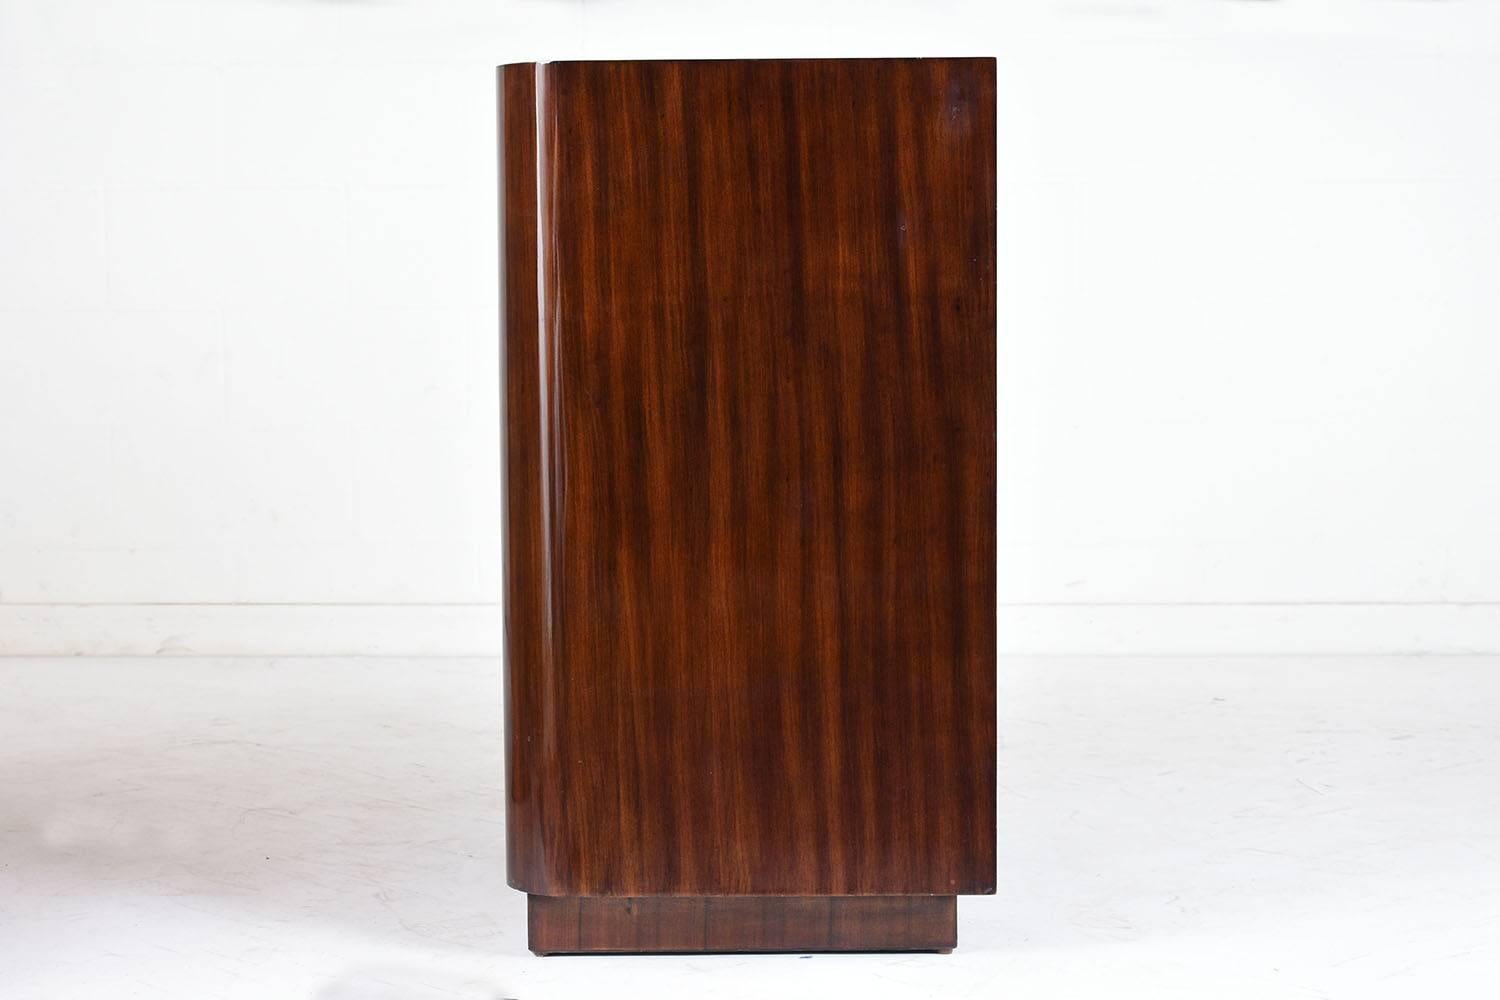 This 1990s Modern-style chest of drawers is designed and made by Ralph Lauren. The chest of drawers is adorned with macassar wood veneers and features a high gloss lacquered finish. The sleek design of this chest features rounded back edges and a